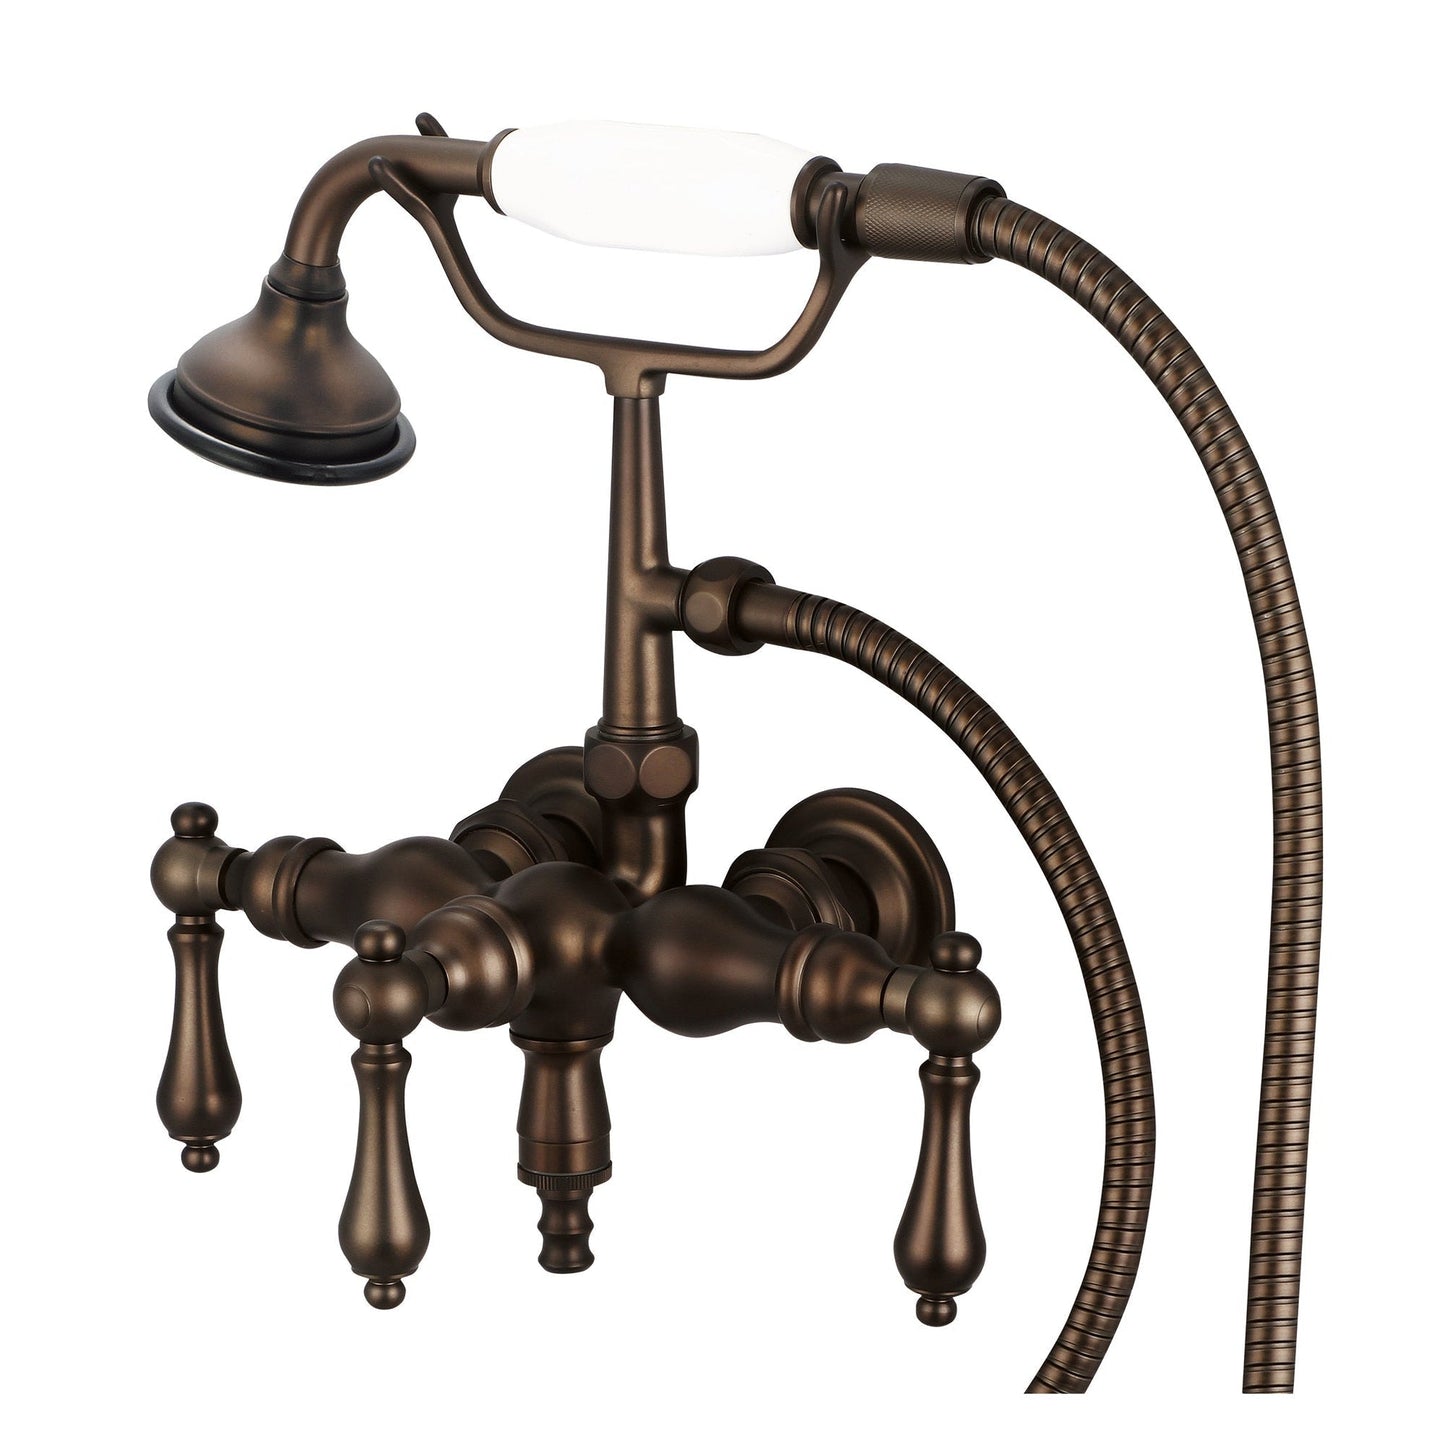 Water Creation Vintage Classic Center Wall Mount Tub F6-0017 9.25" Brown Solid Brass Faucet With Down Spout, Straight Wall Connector And Handheld Shower And Metal Lever Handles Without Labels